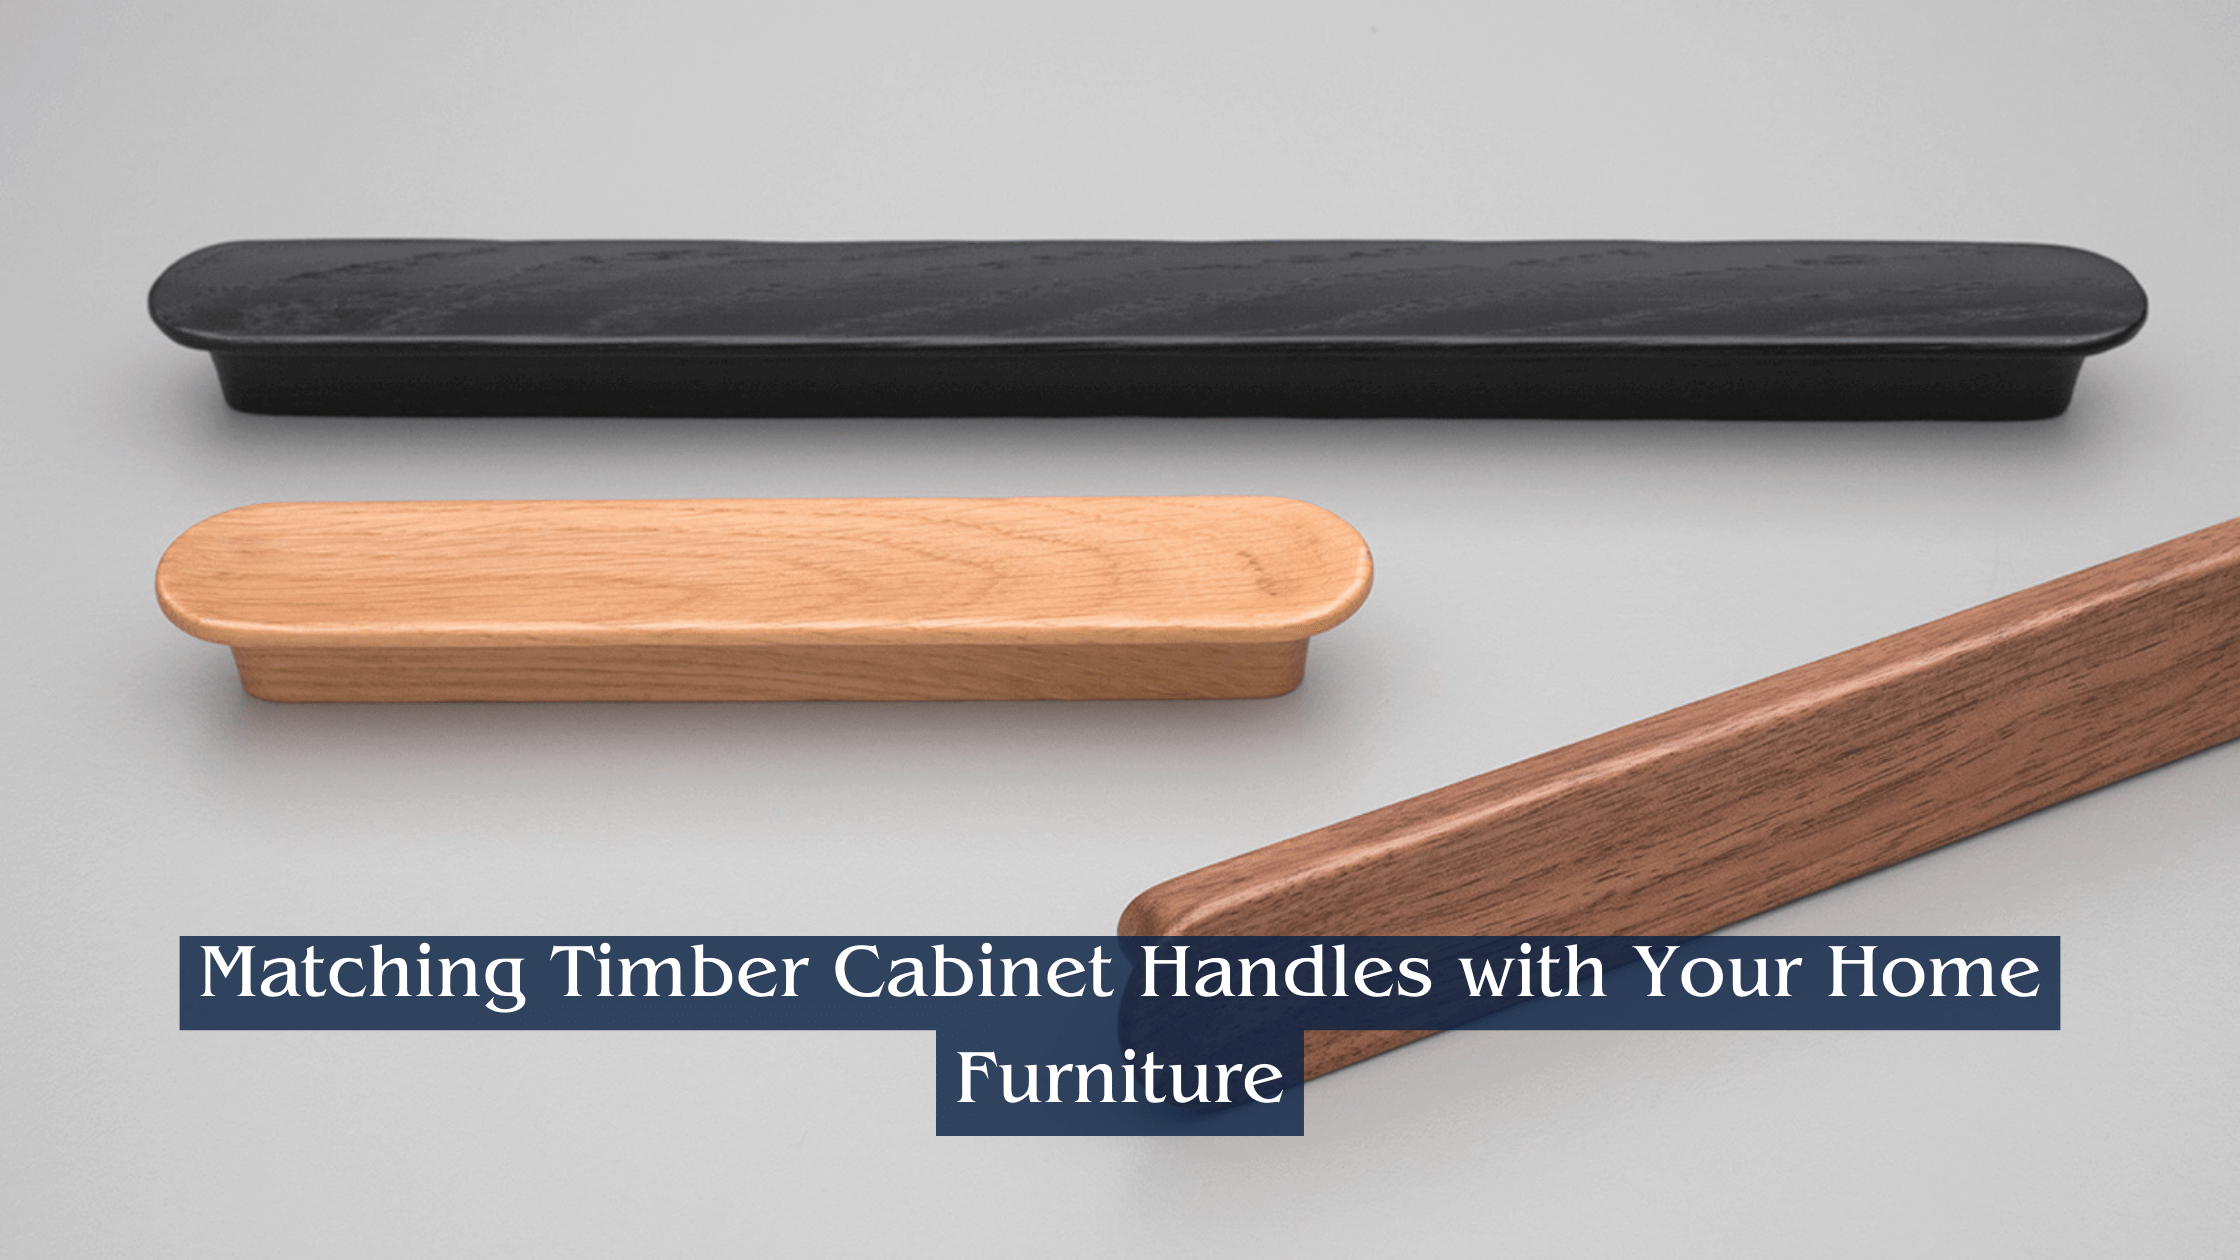 Matching Timber Cabinet Handles With Your Home Furniture